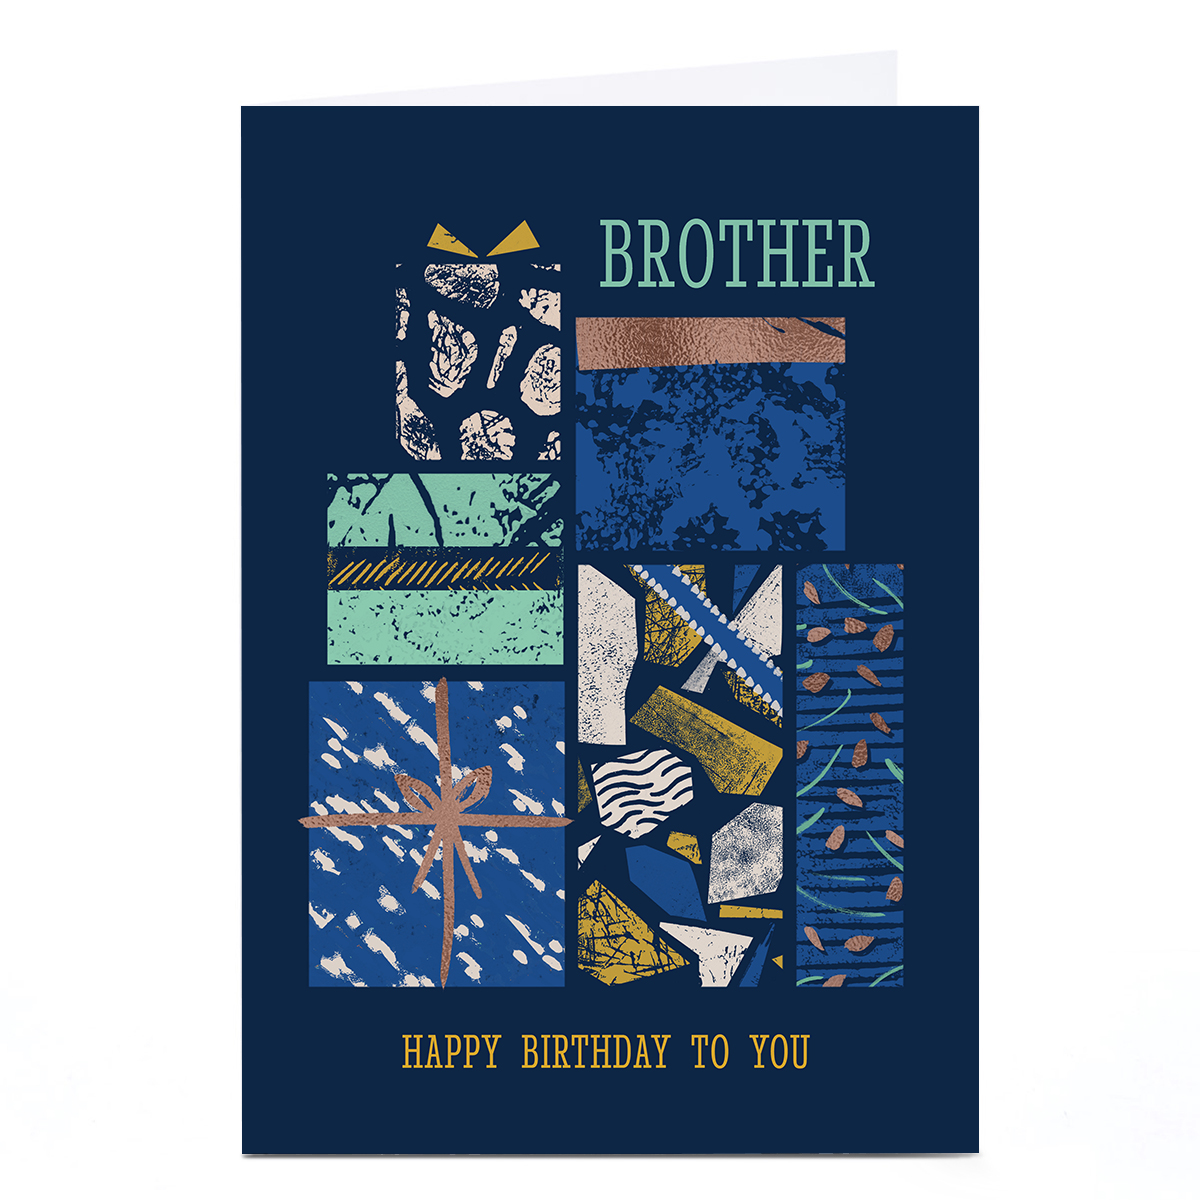 Personalised Rebecca Prinn Birthday Card - Brother, Gifts